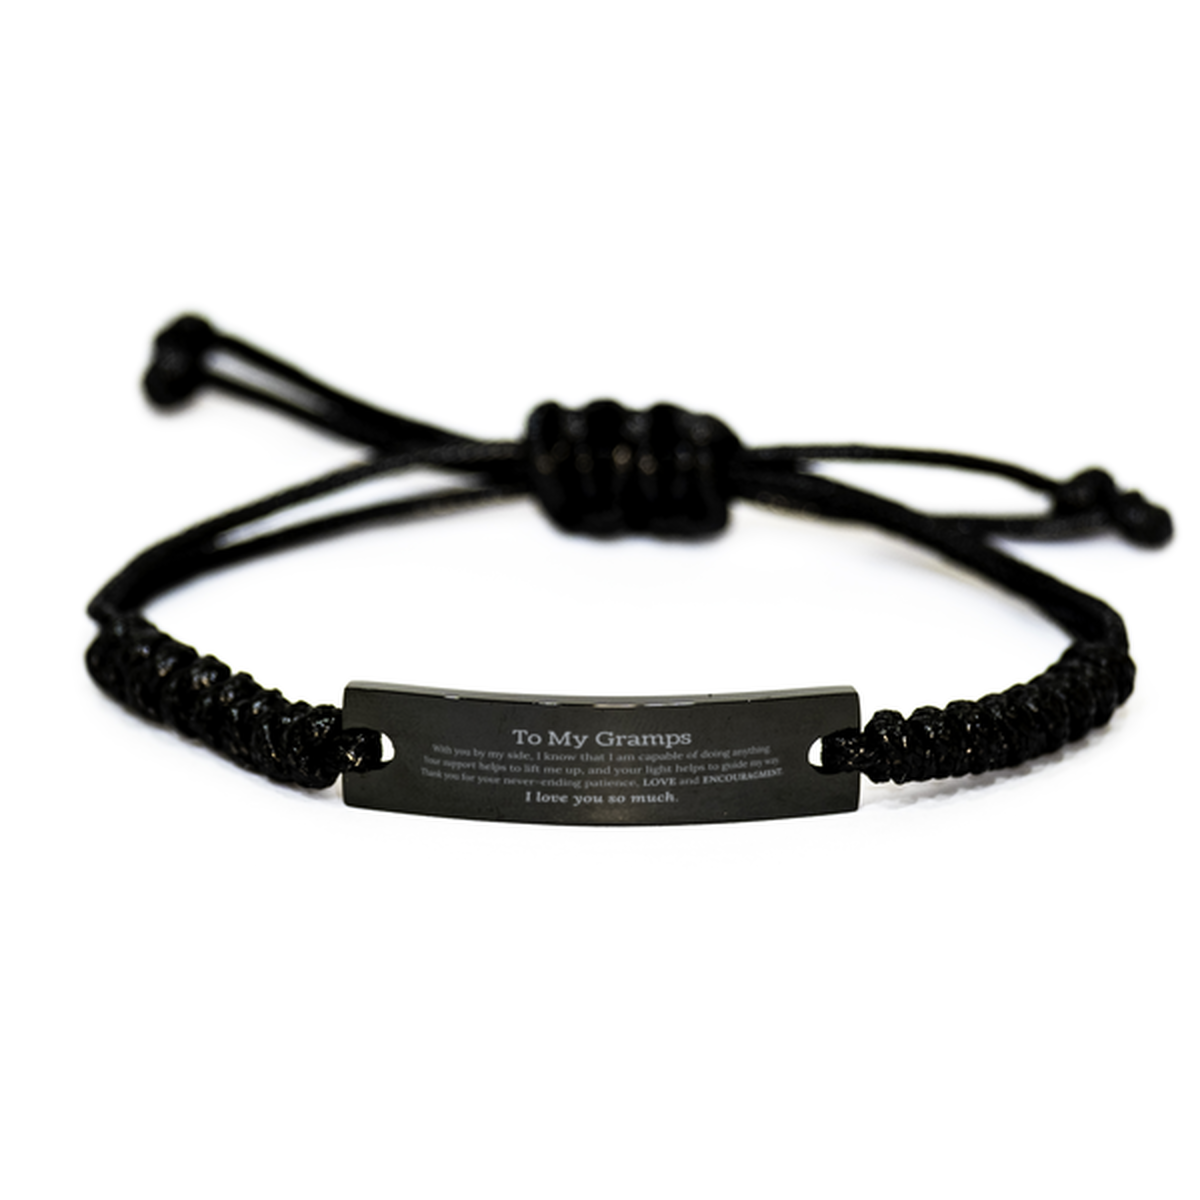 Appreciation Gramps Black Rope Bracelet Gifts, To My Gramps Birthday Christmas Wedding Keepsake Gifts for Gramps With you by my side, I know that I am capable of doing anything. I love you so much